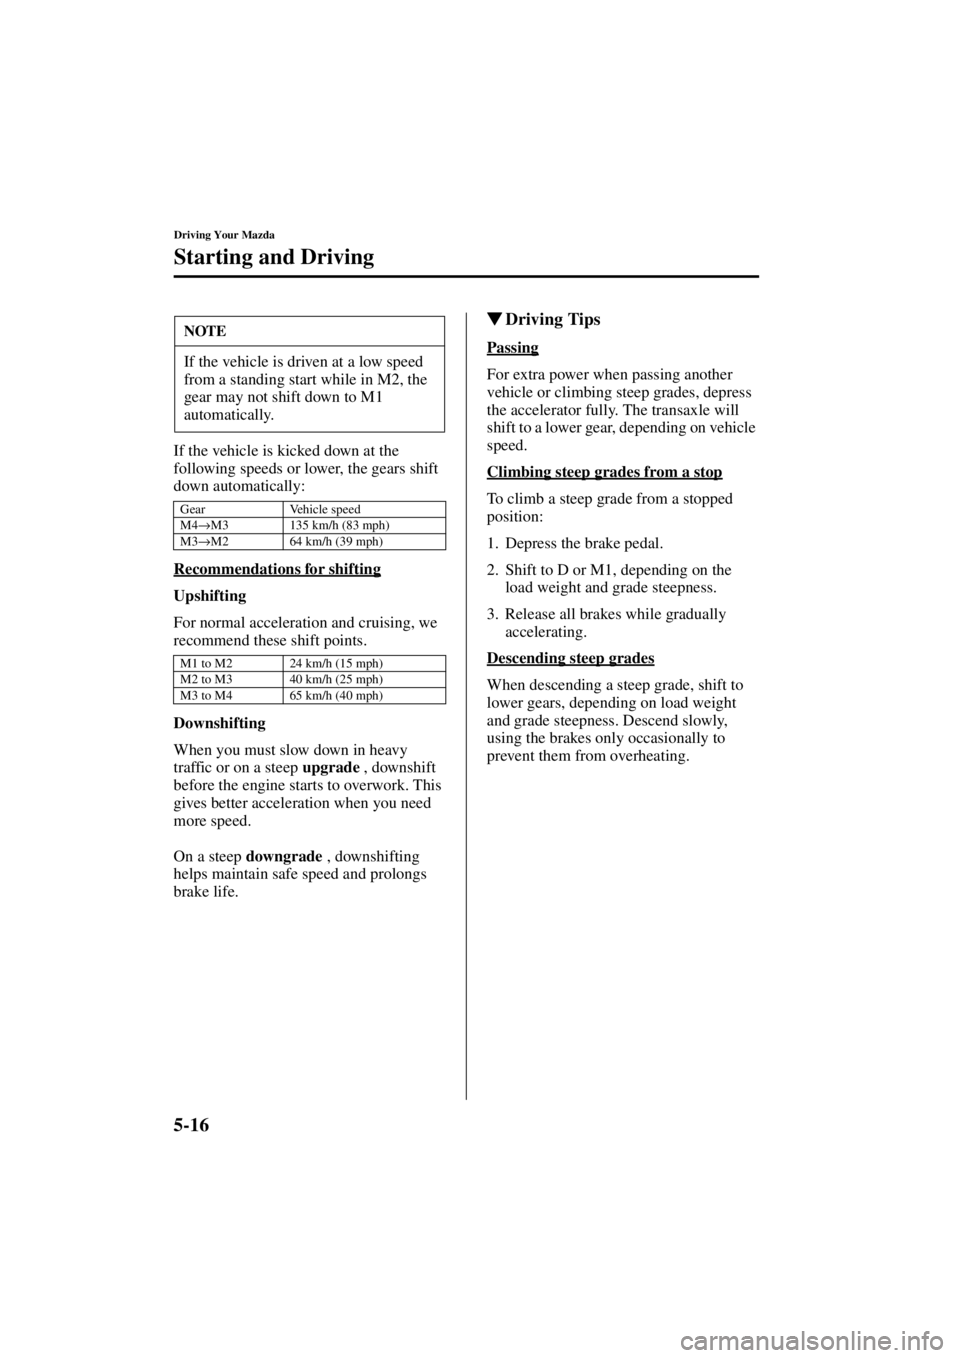 MAZDA MODEL 3 4-DOOR 2004 User Guide 5-16
Driving Your Mazda
Starting and Driving
Form No. 8S18-EA-03I
If the vehicle is kicked down at the 
following speeds or lower, the gears shift 
down automatically:
Recommendations for shifting
Ups